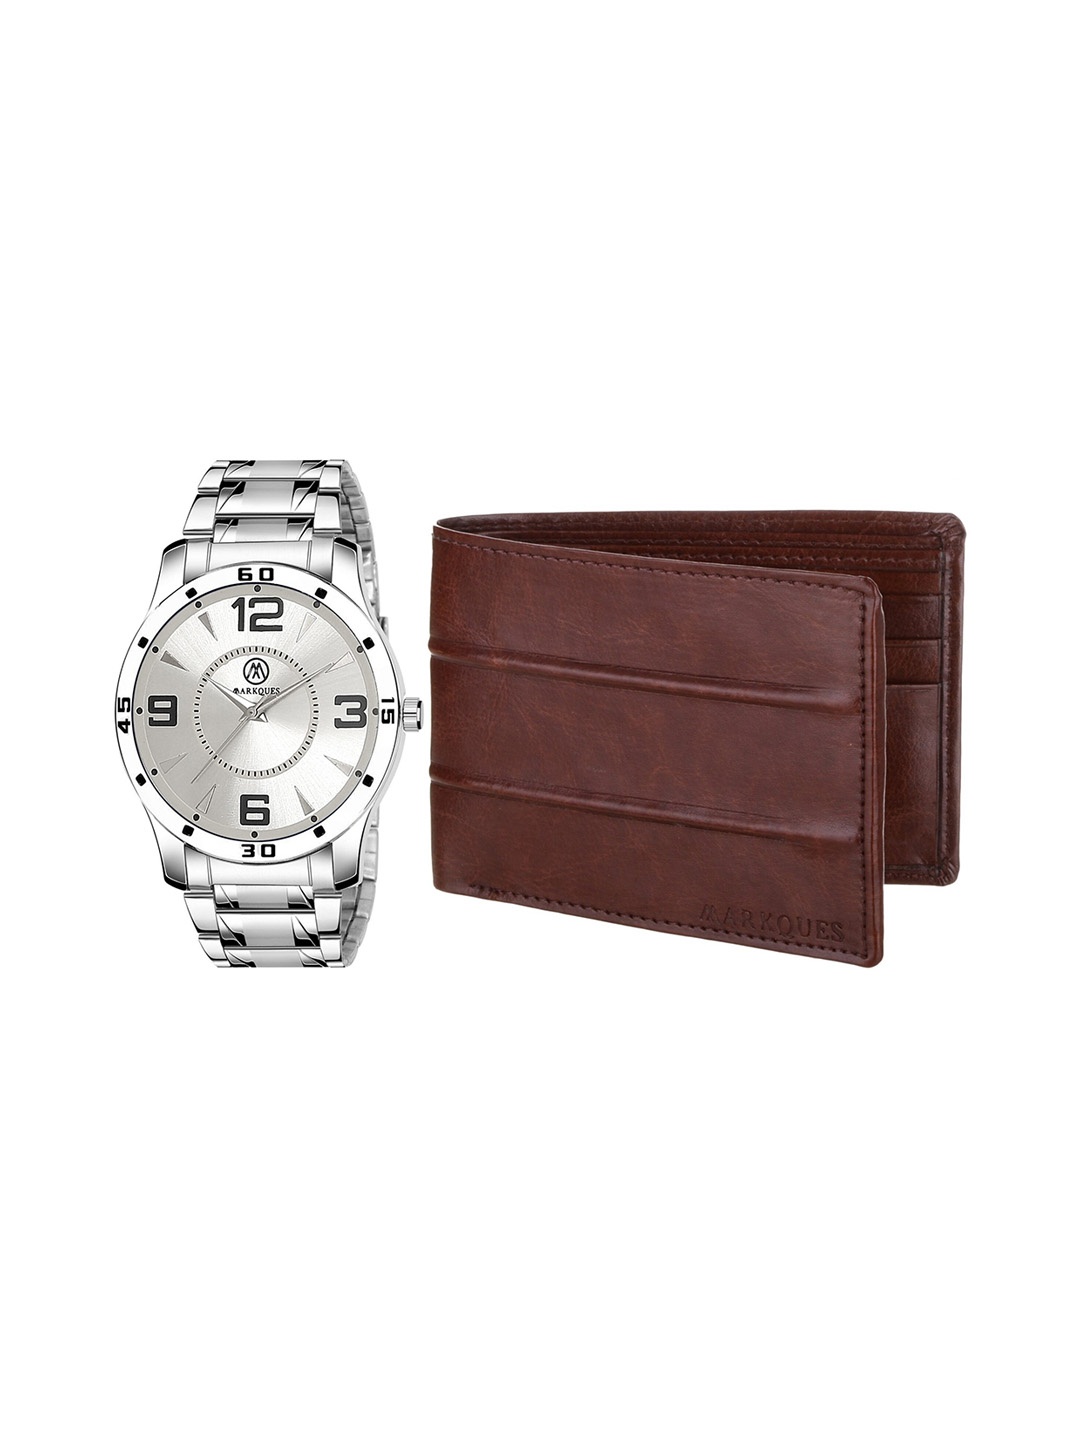 

MARKQUES Men Silver Toned & Brown Watch And Leather Wallet Accessory Gift Set